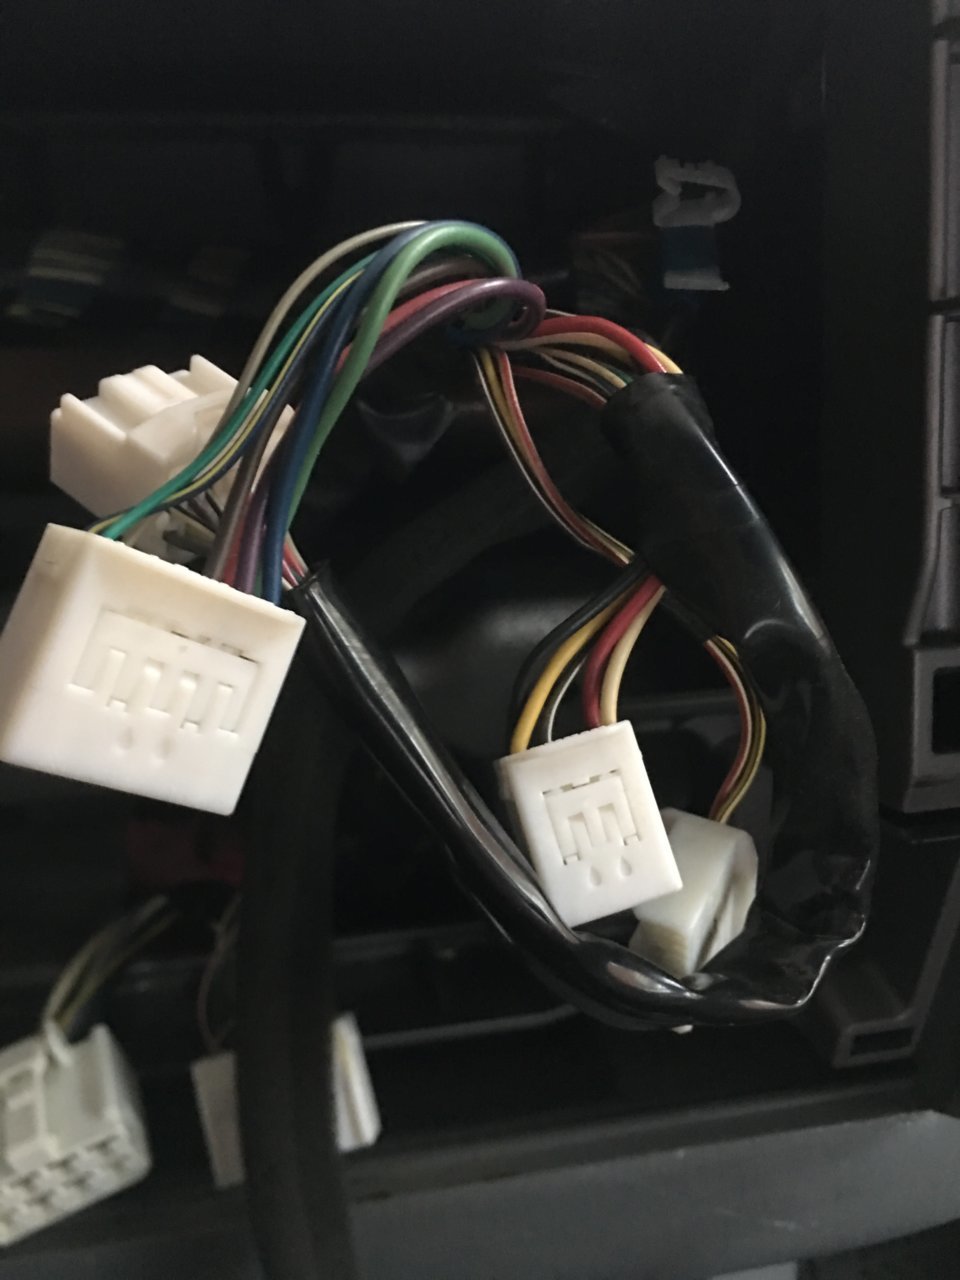 2018 Toyota Tacoma Stereo Wiring Diagram from twstatic.net